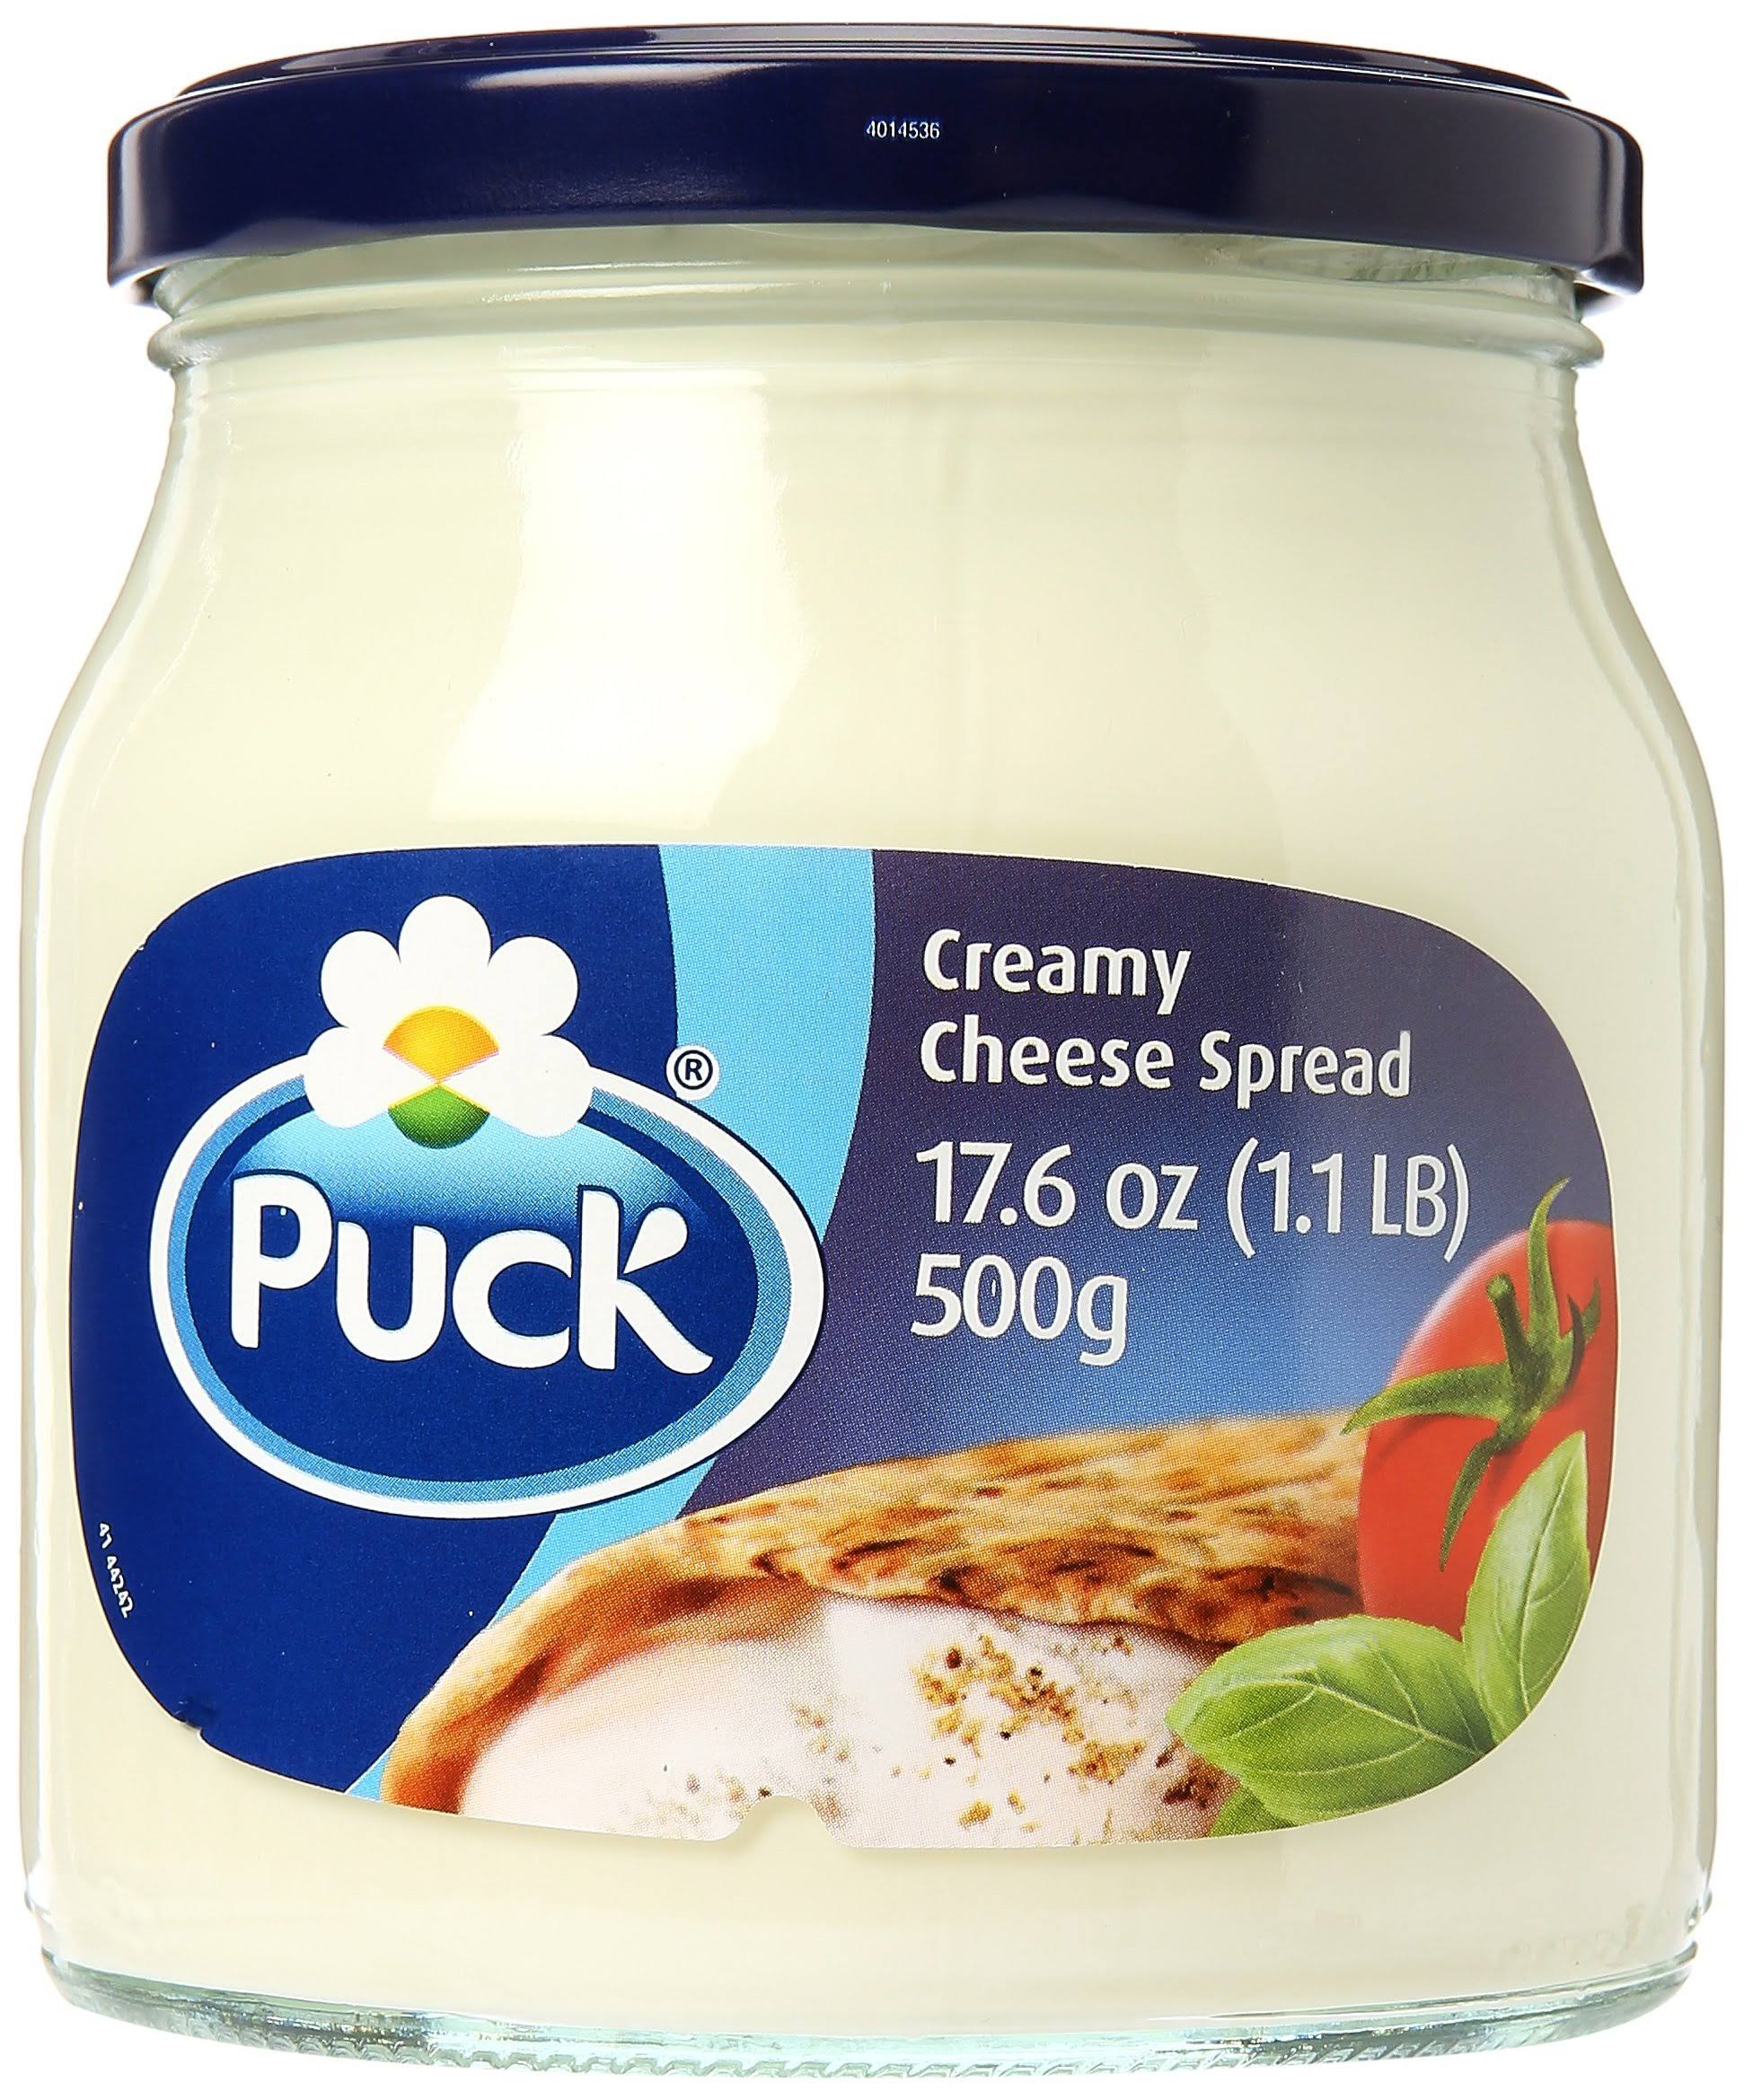 Puck Pure and Natural Cream Cheese Spread - 500g